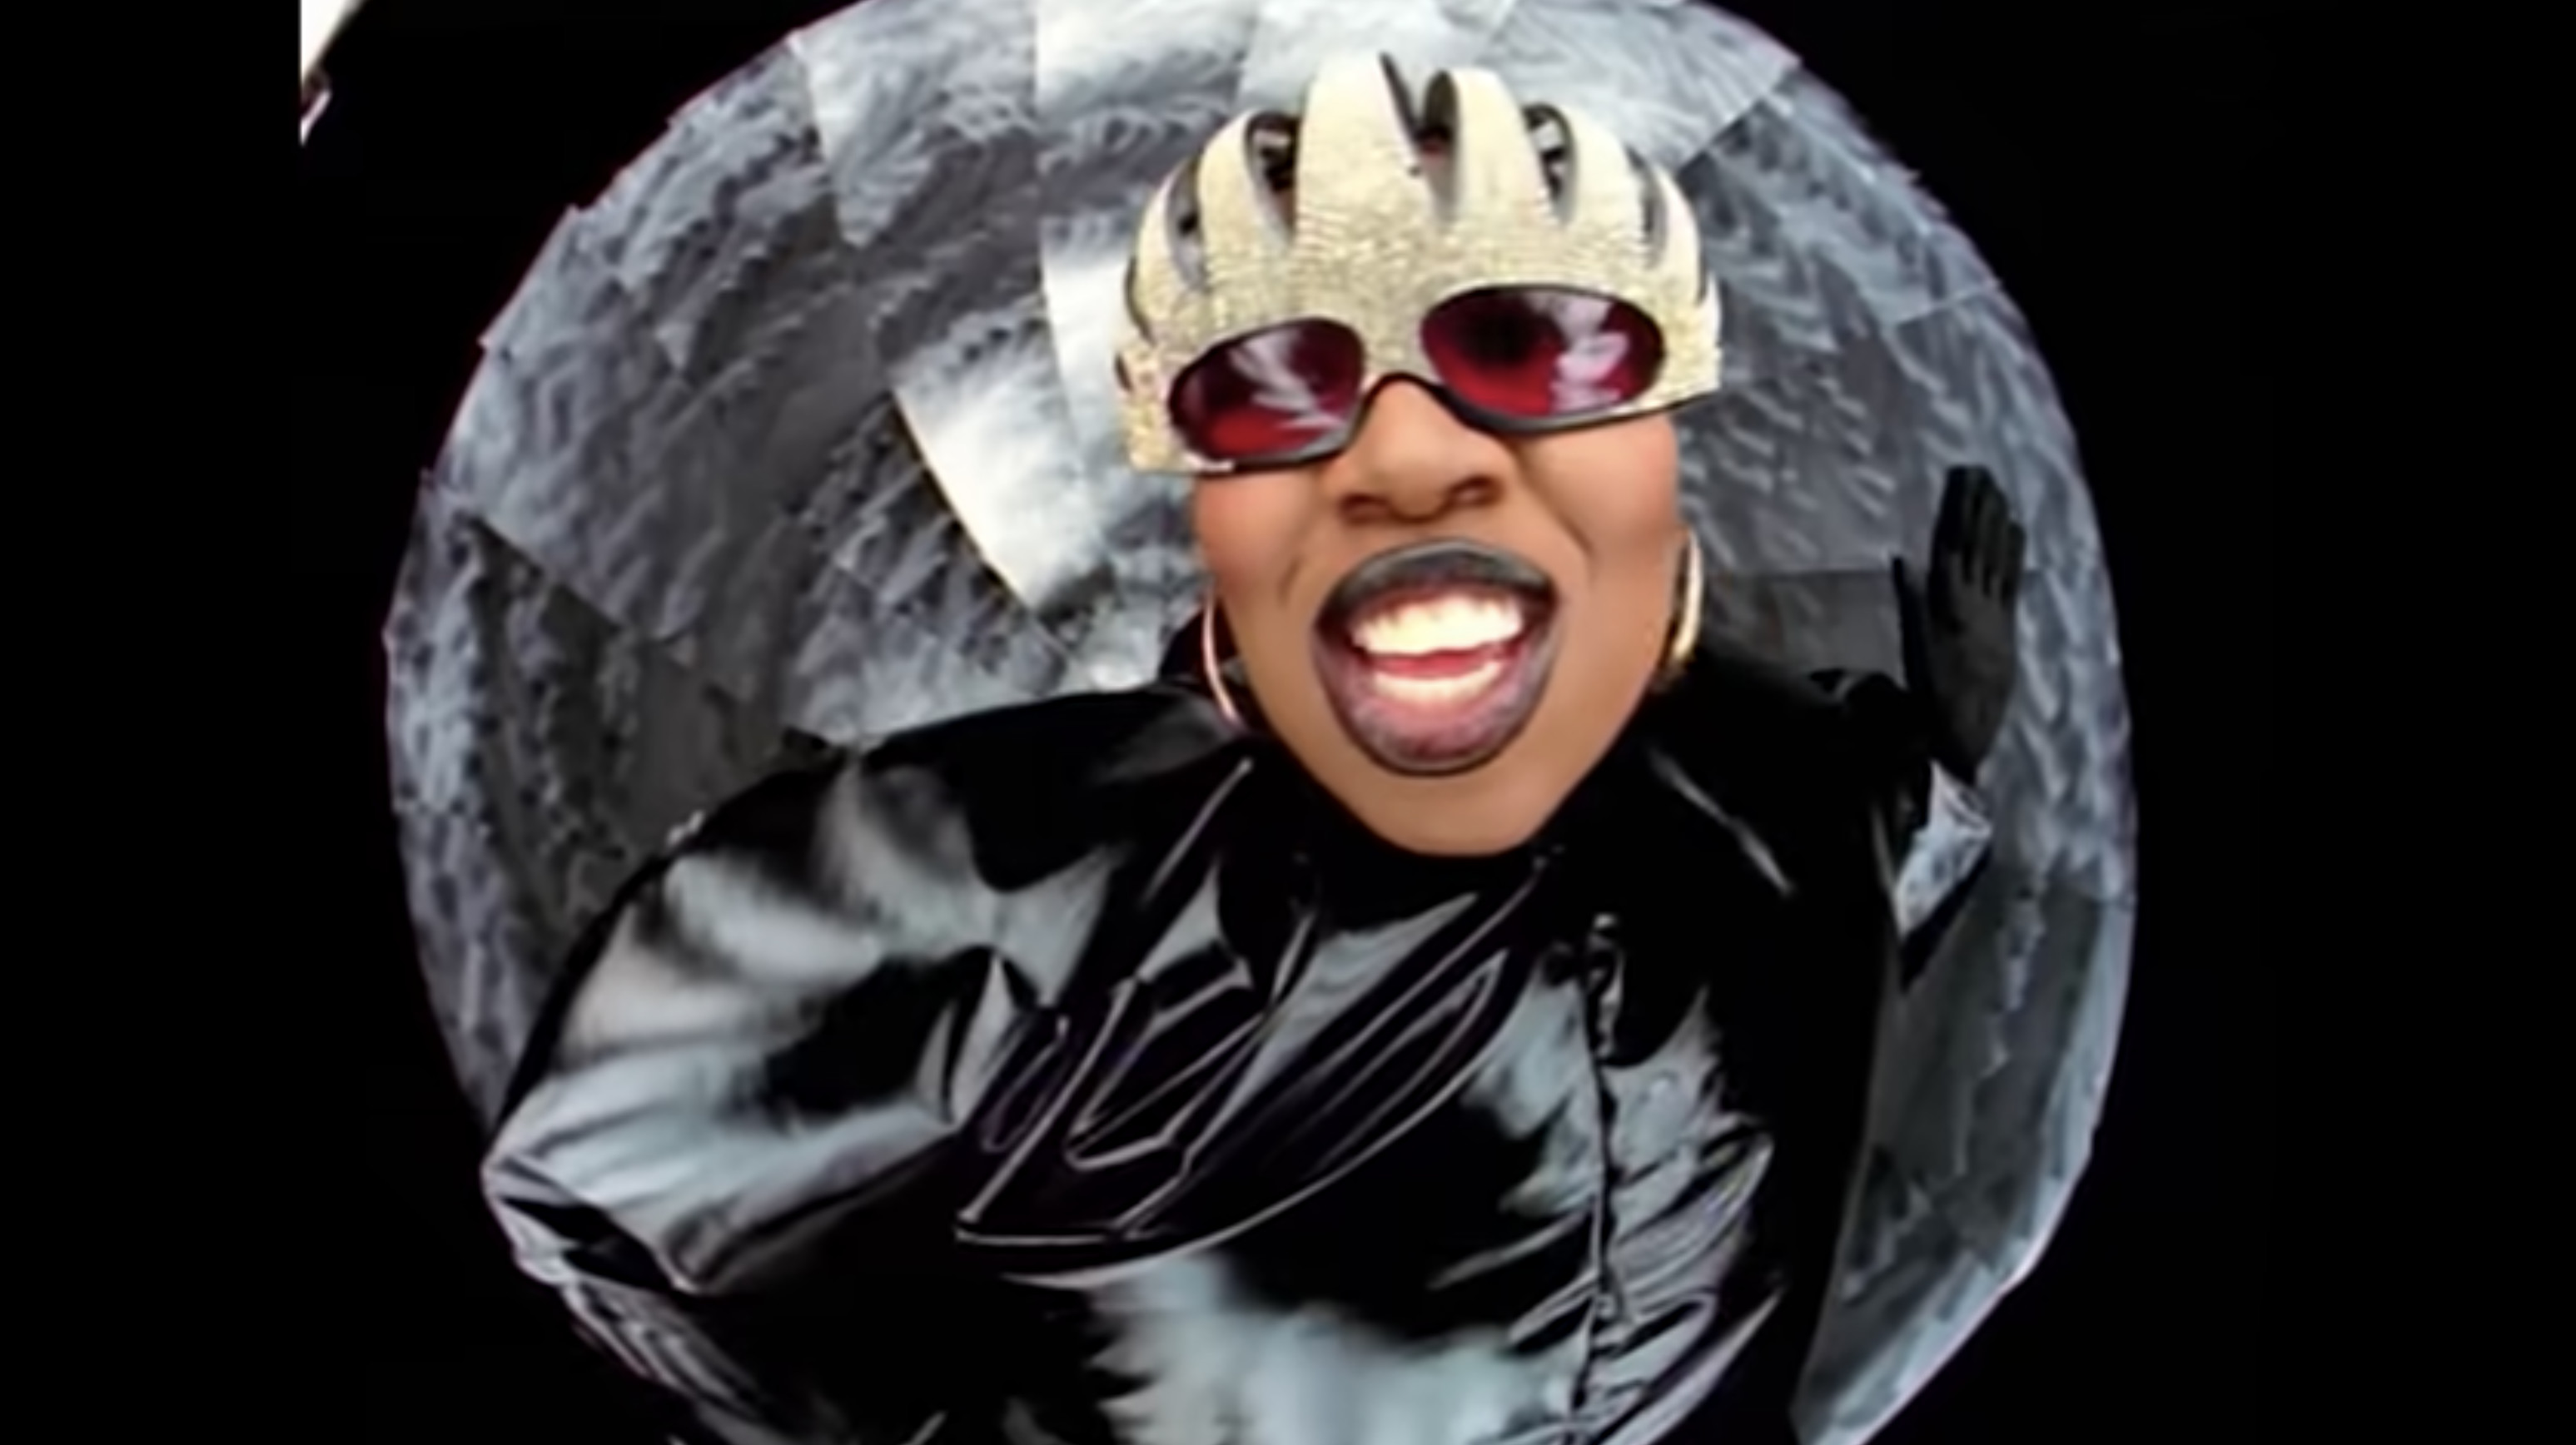 Missy Elliott’s “Rain” Redefined How Many Artists Approached Hip Hop